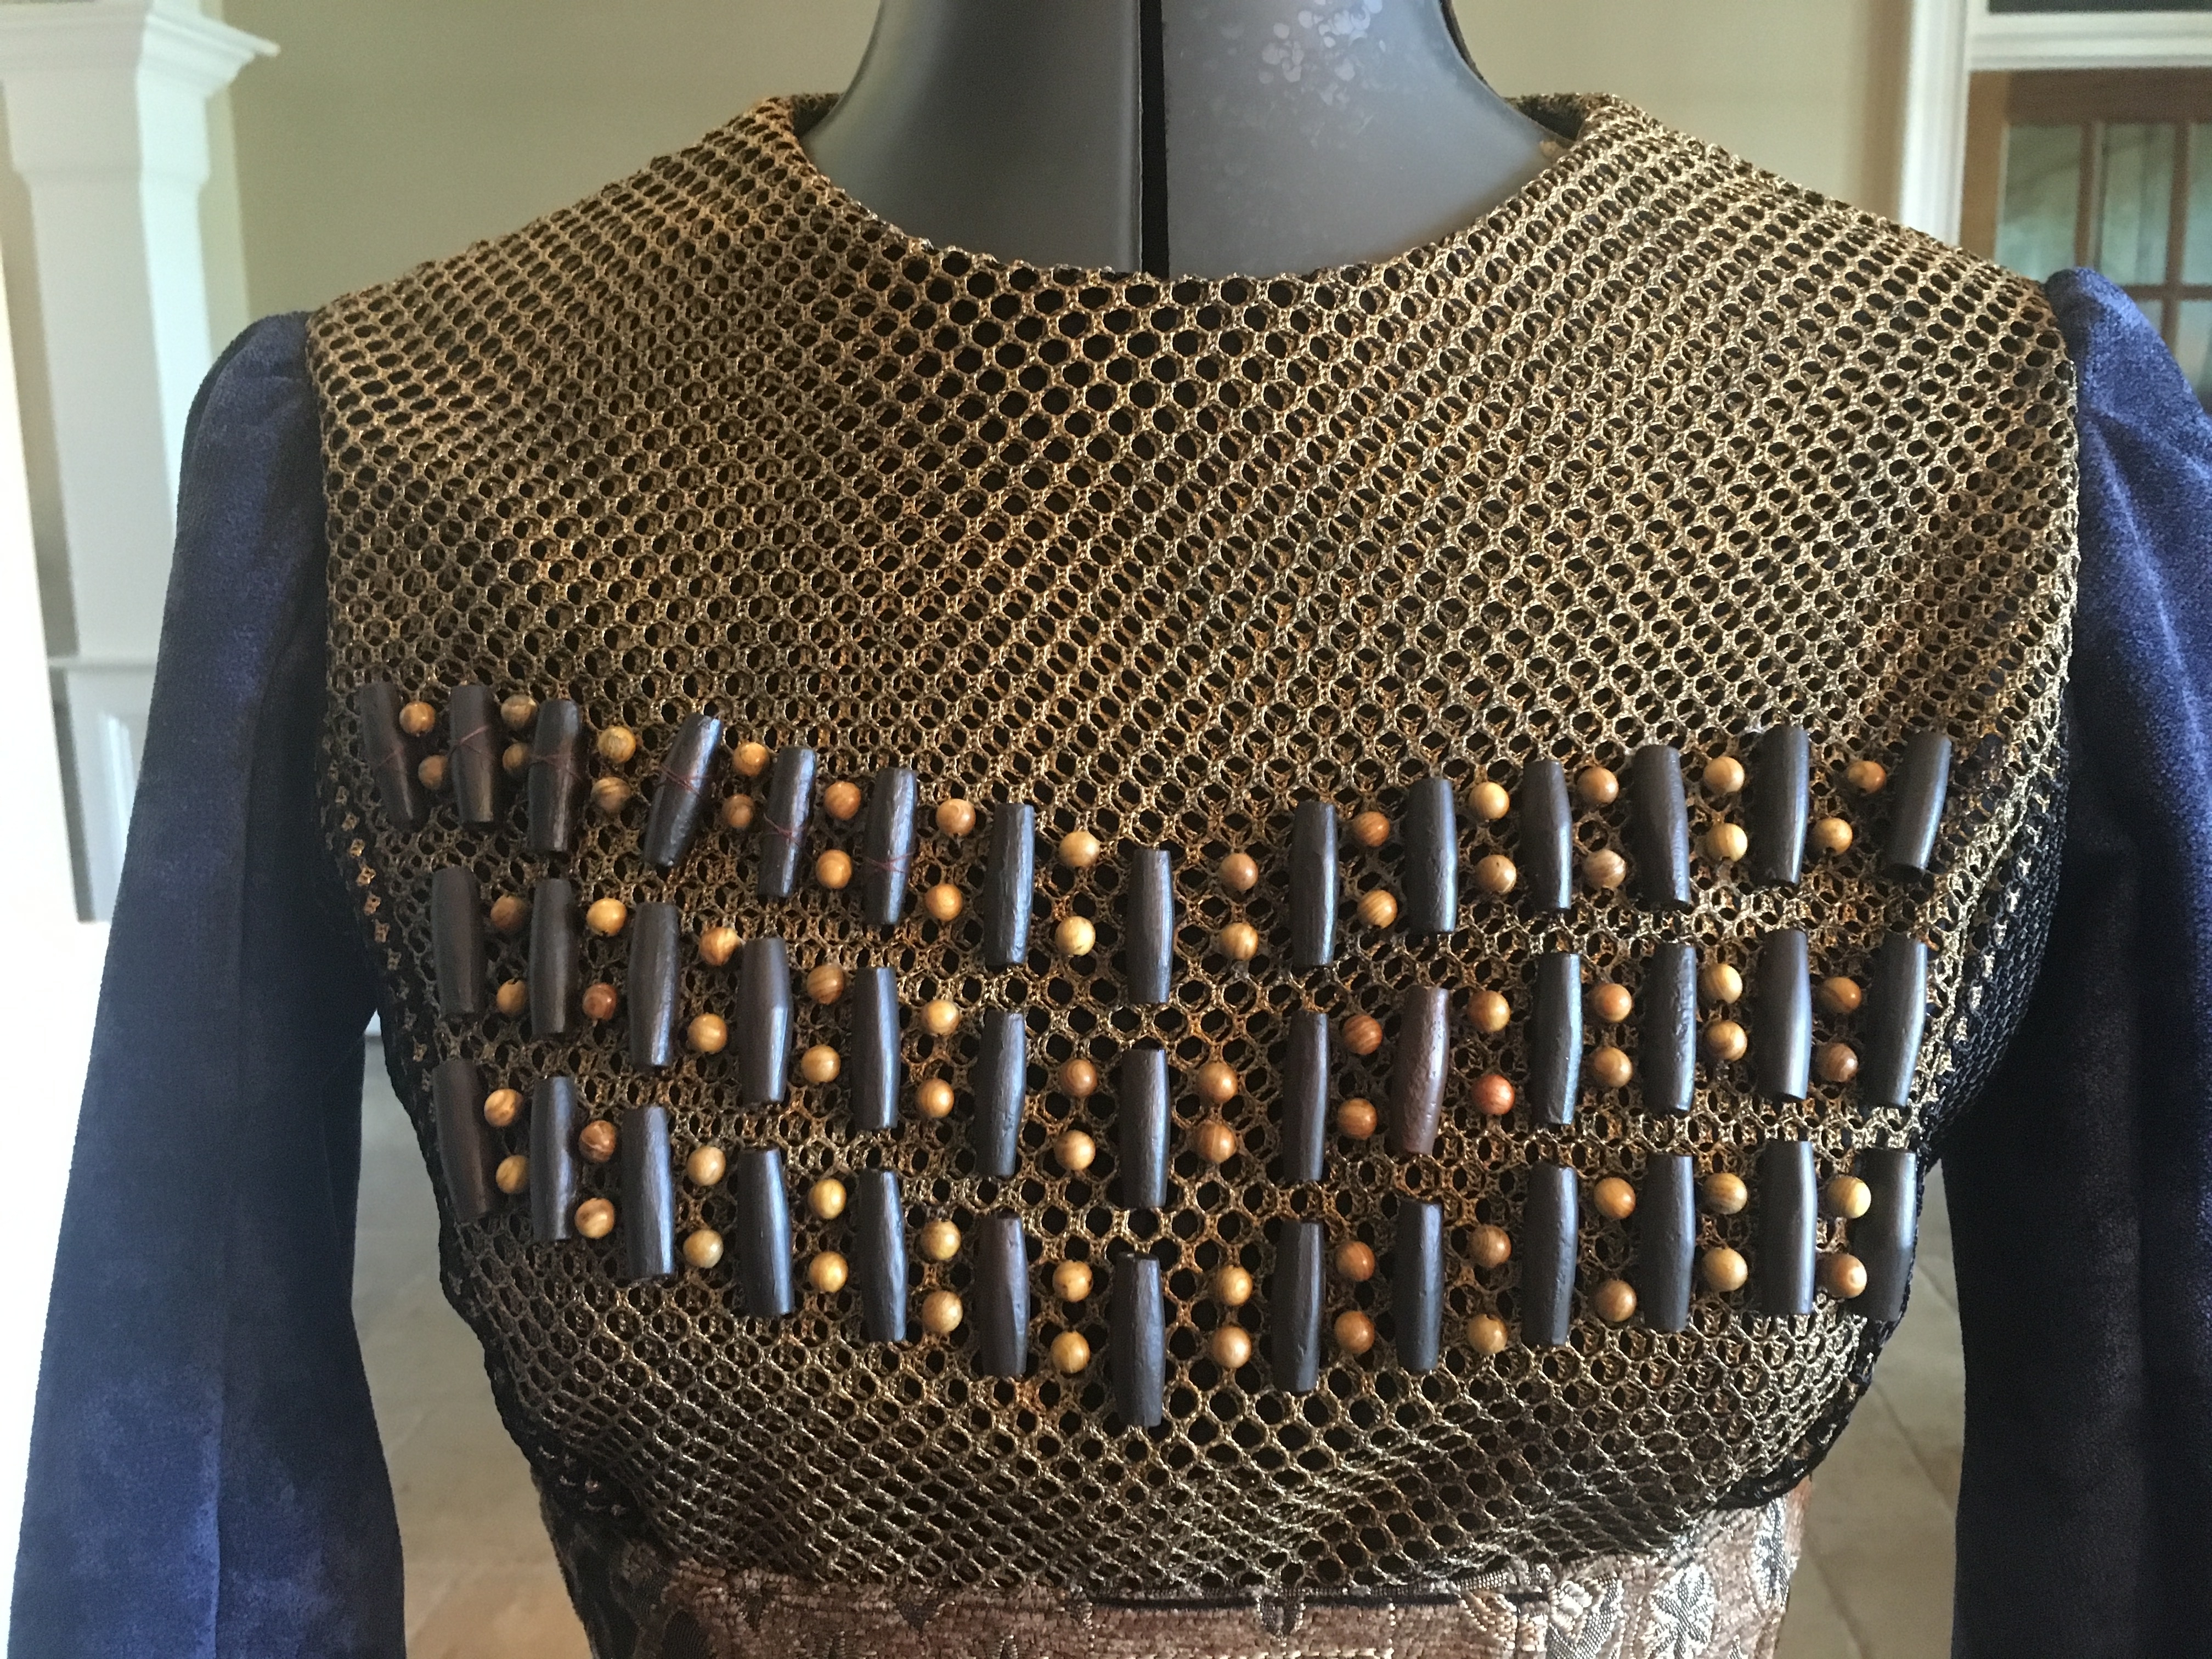 Finally finished the beading on the chest